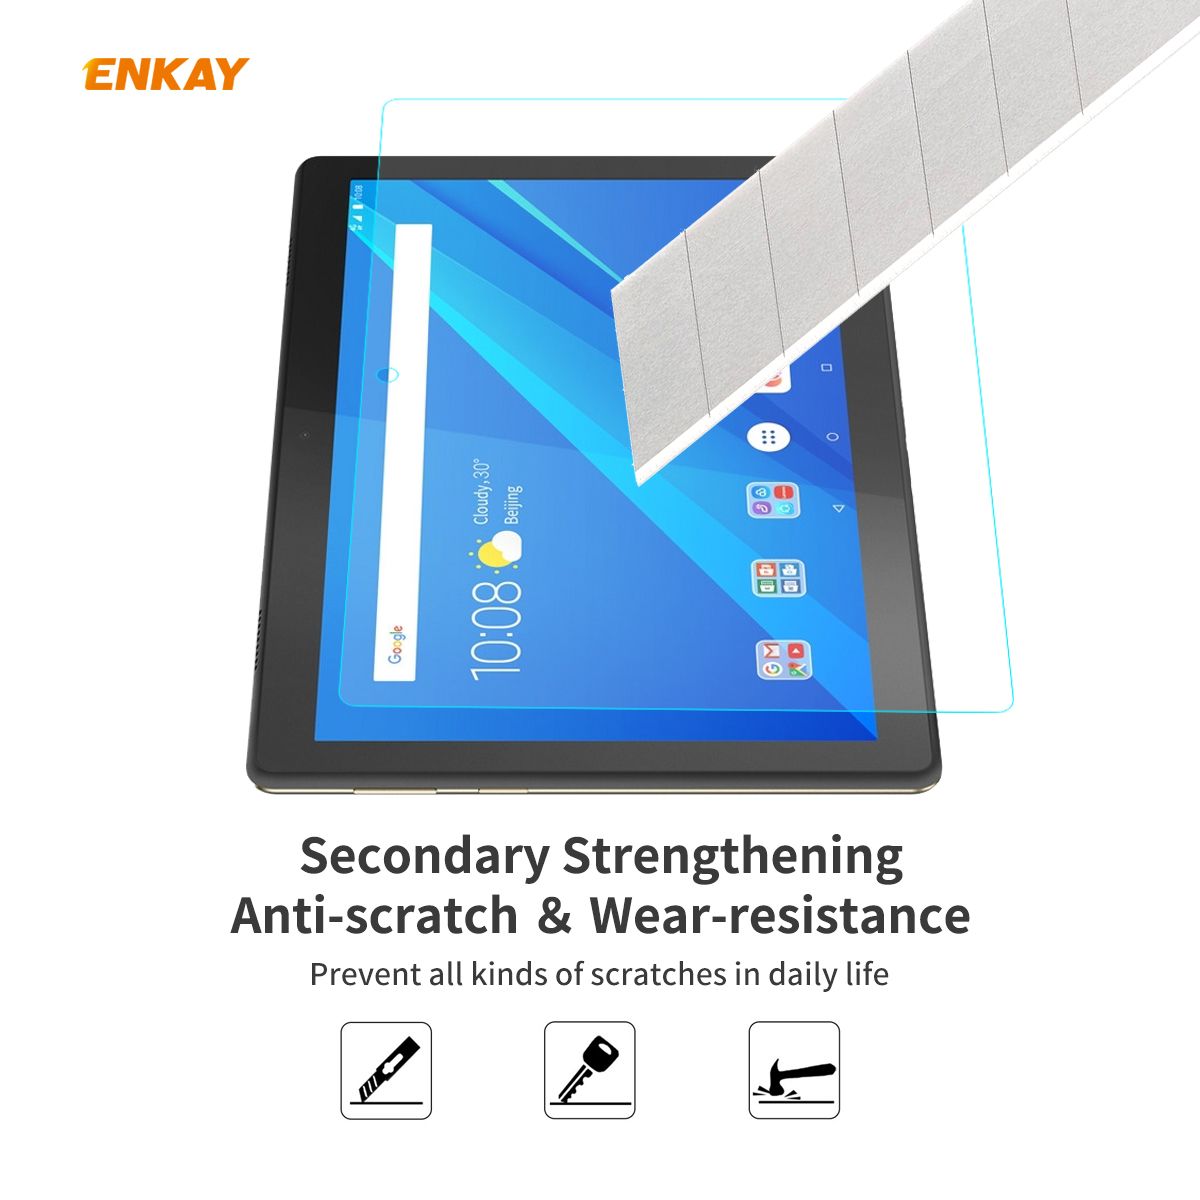 ENKAY-033mm-9H-25D-Curved-Edge-Tempered-Glass-Protective-Film-Screen-Protector-for-Lenovo-M10-Tablet-1734317